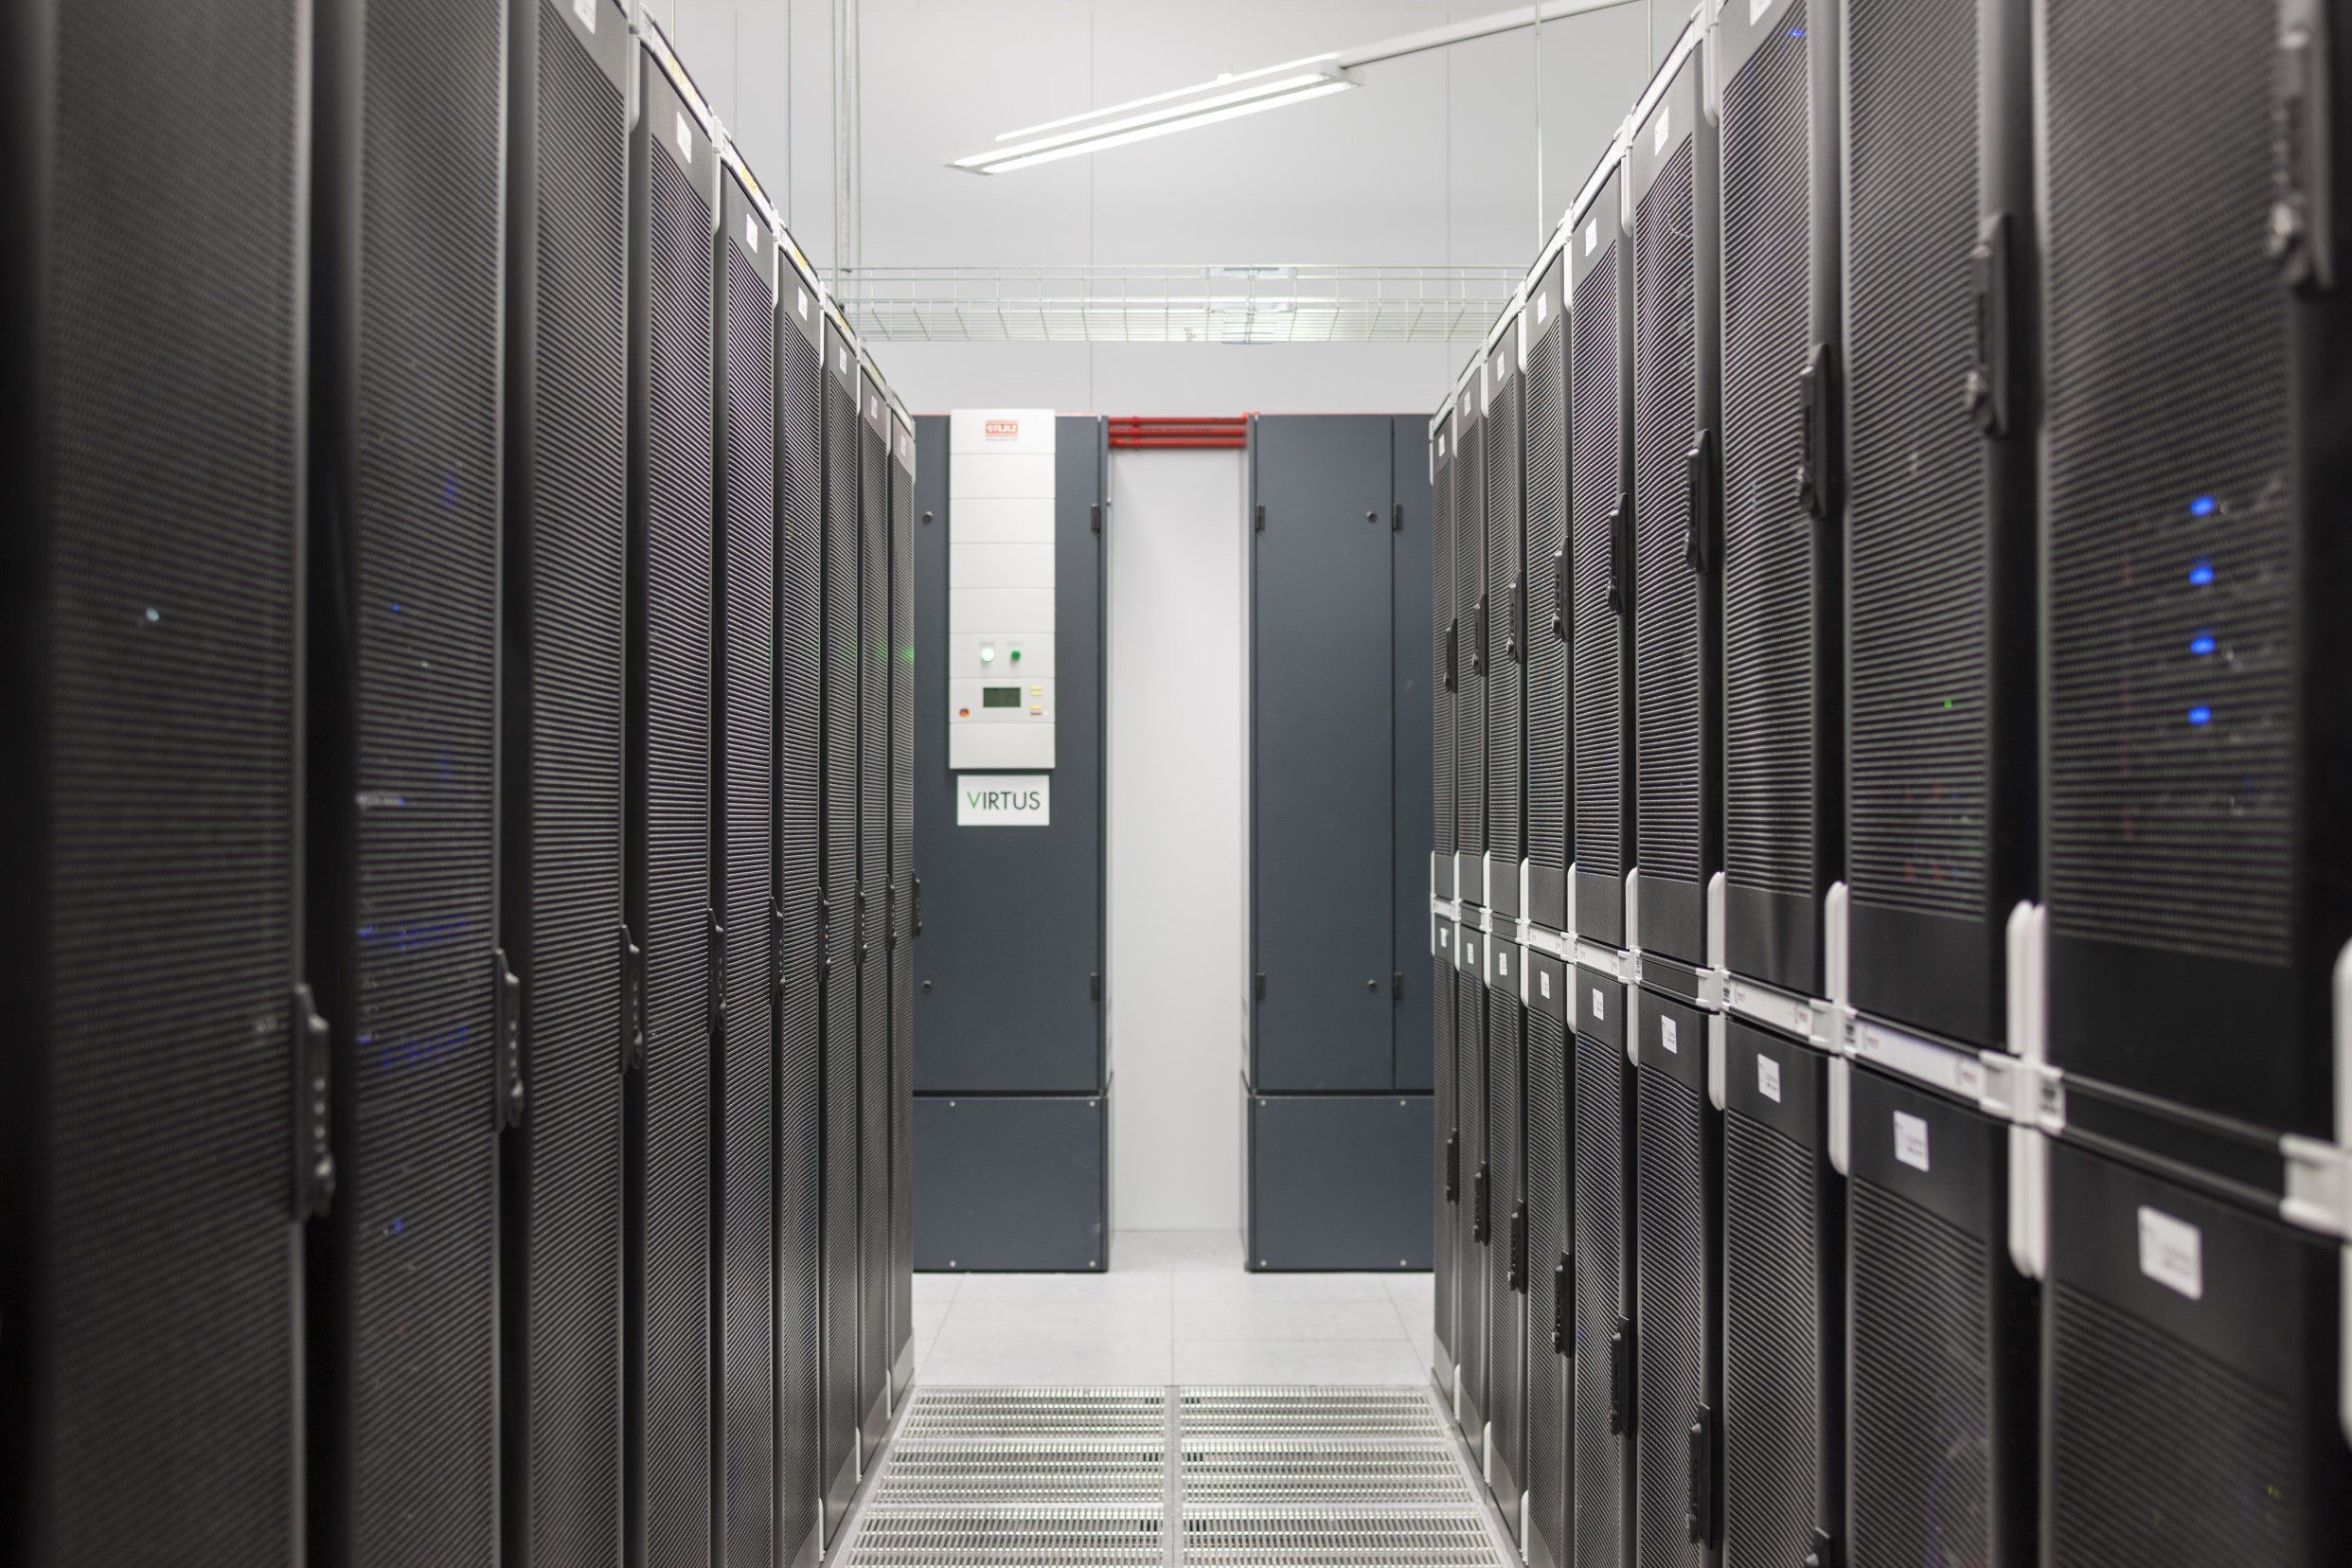 COLOCATION BUYER S GUIDE Selecting a colocation provider needn't be a risky endeavour.